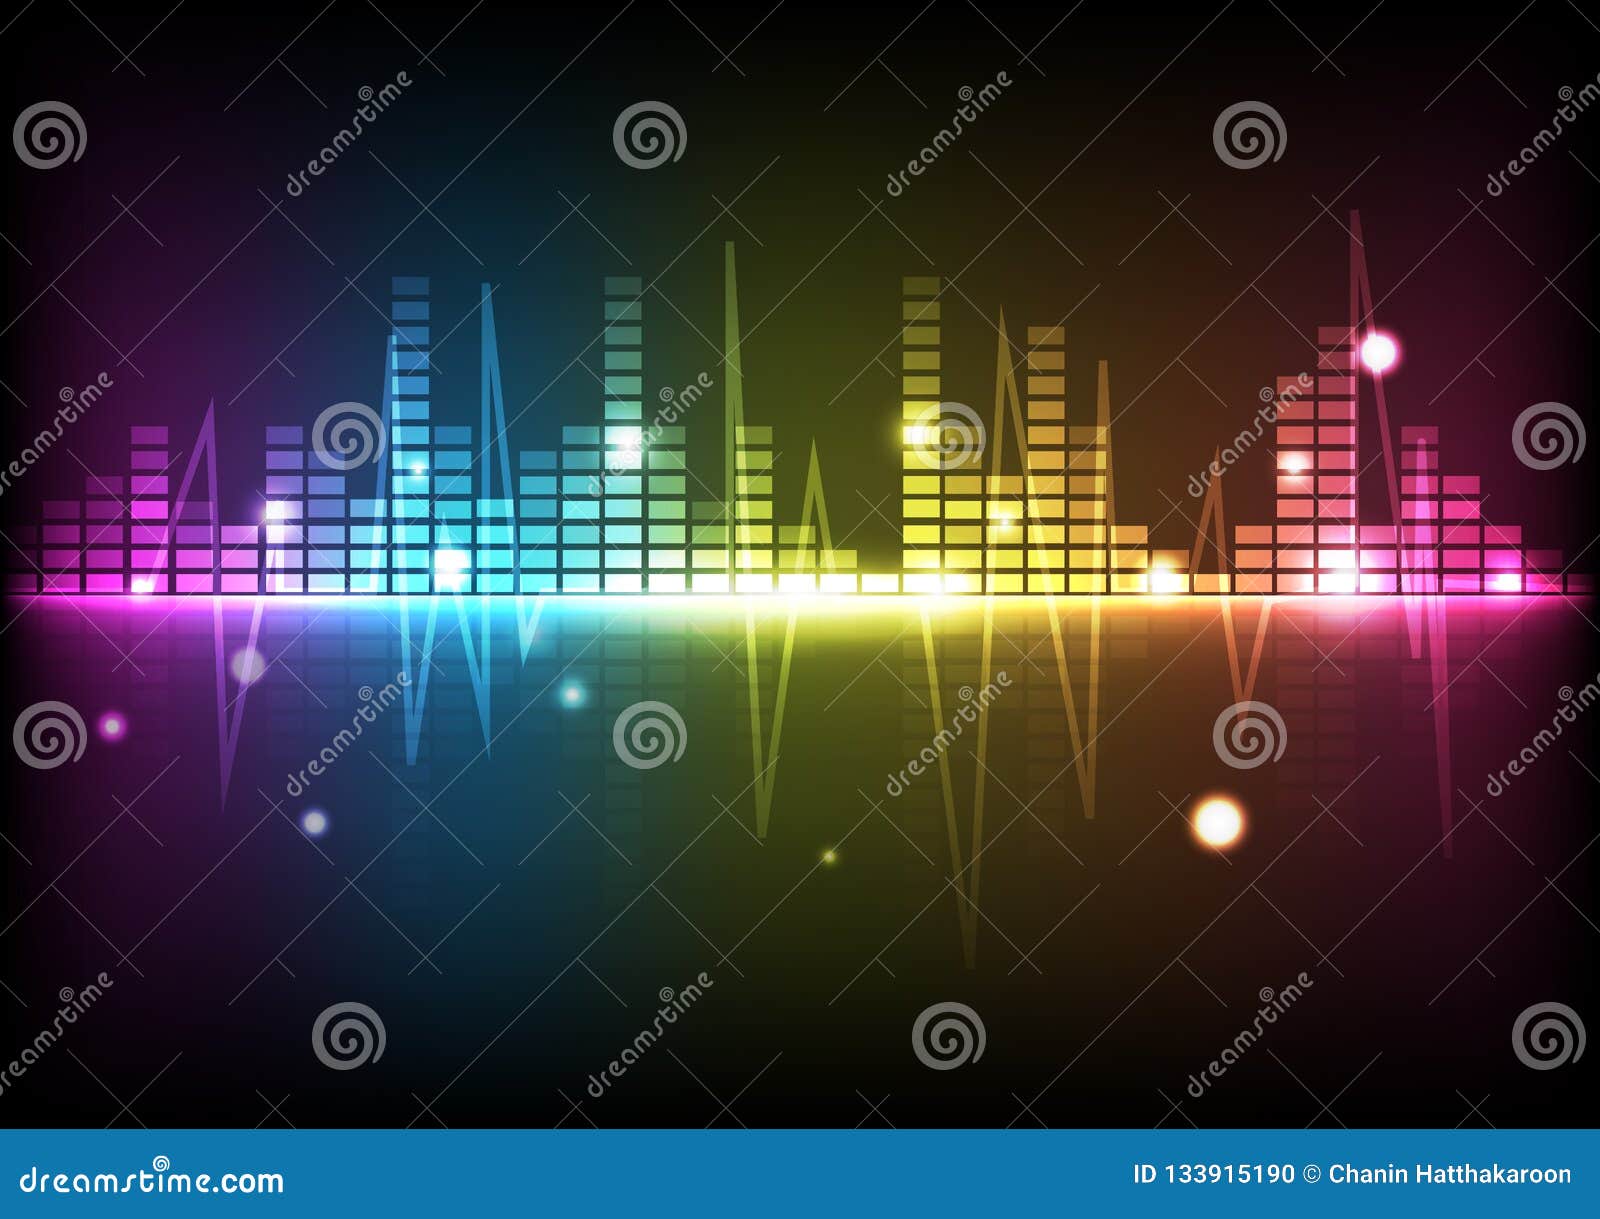 Abstract Background Digital Technology Disco Spectrum Music Equalizer ...